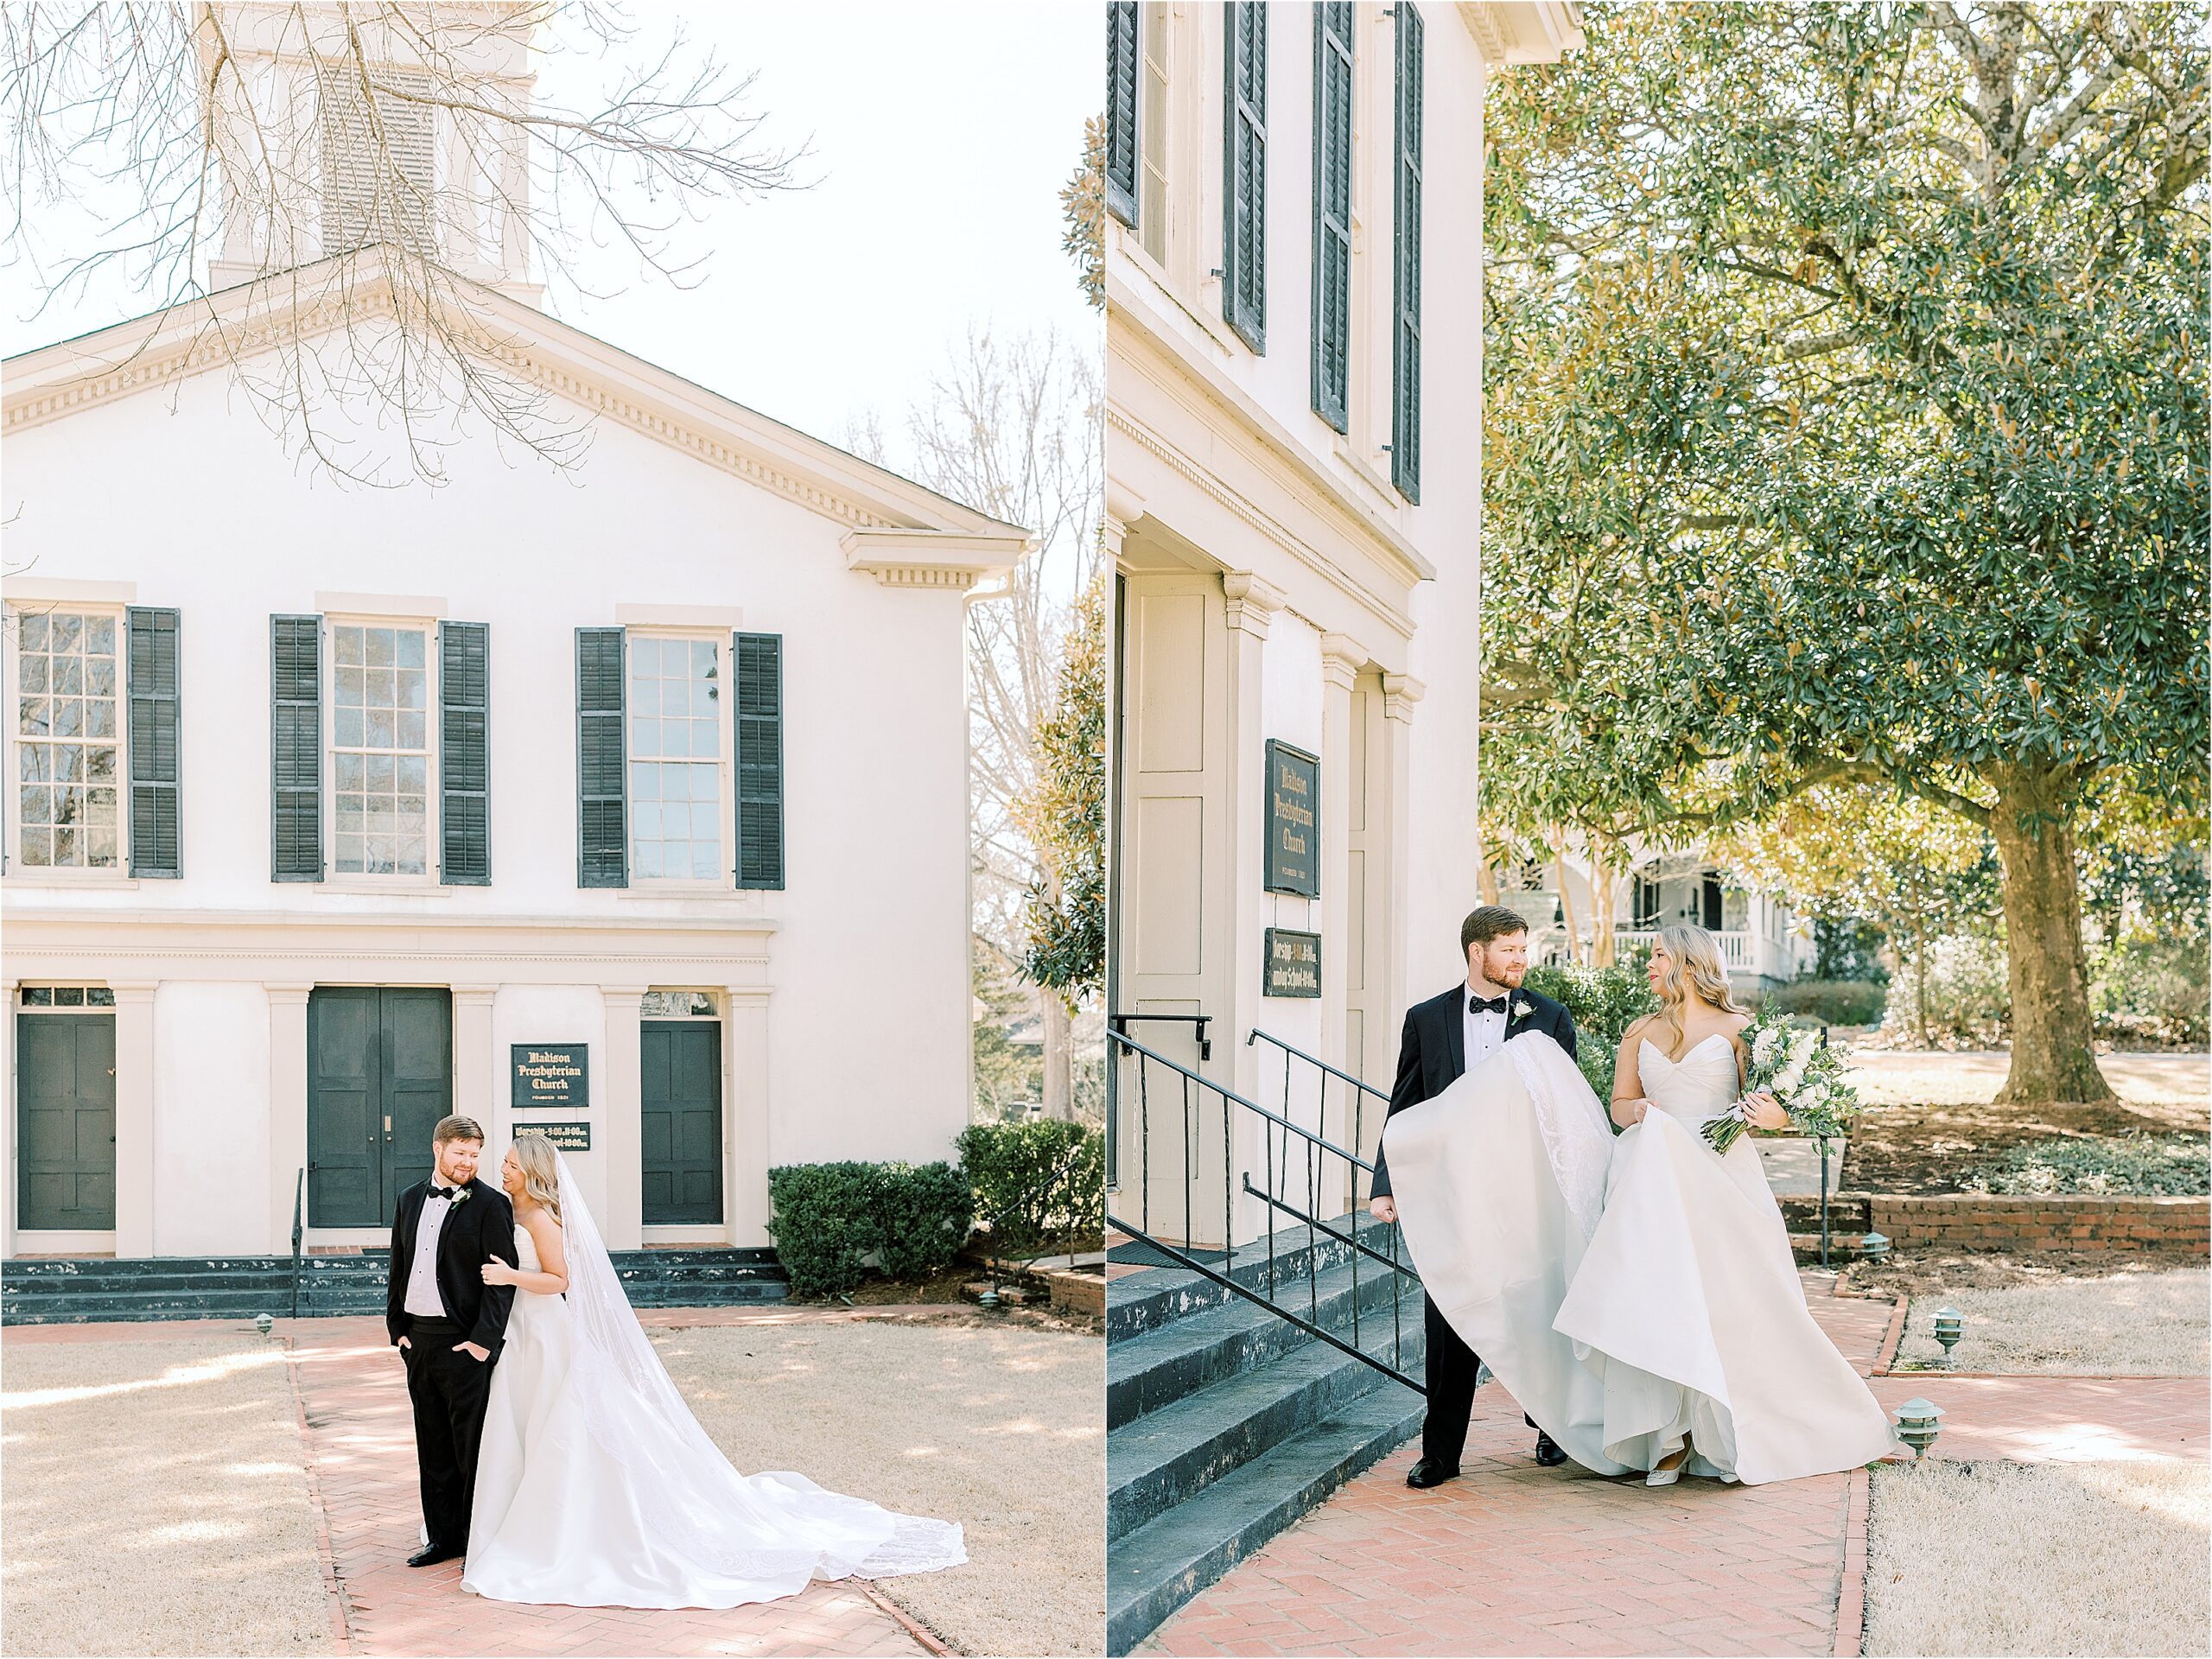 Bride in a white dress and groom in a black tuxedo in front of a white church. 